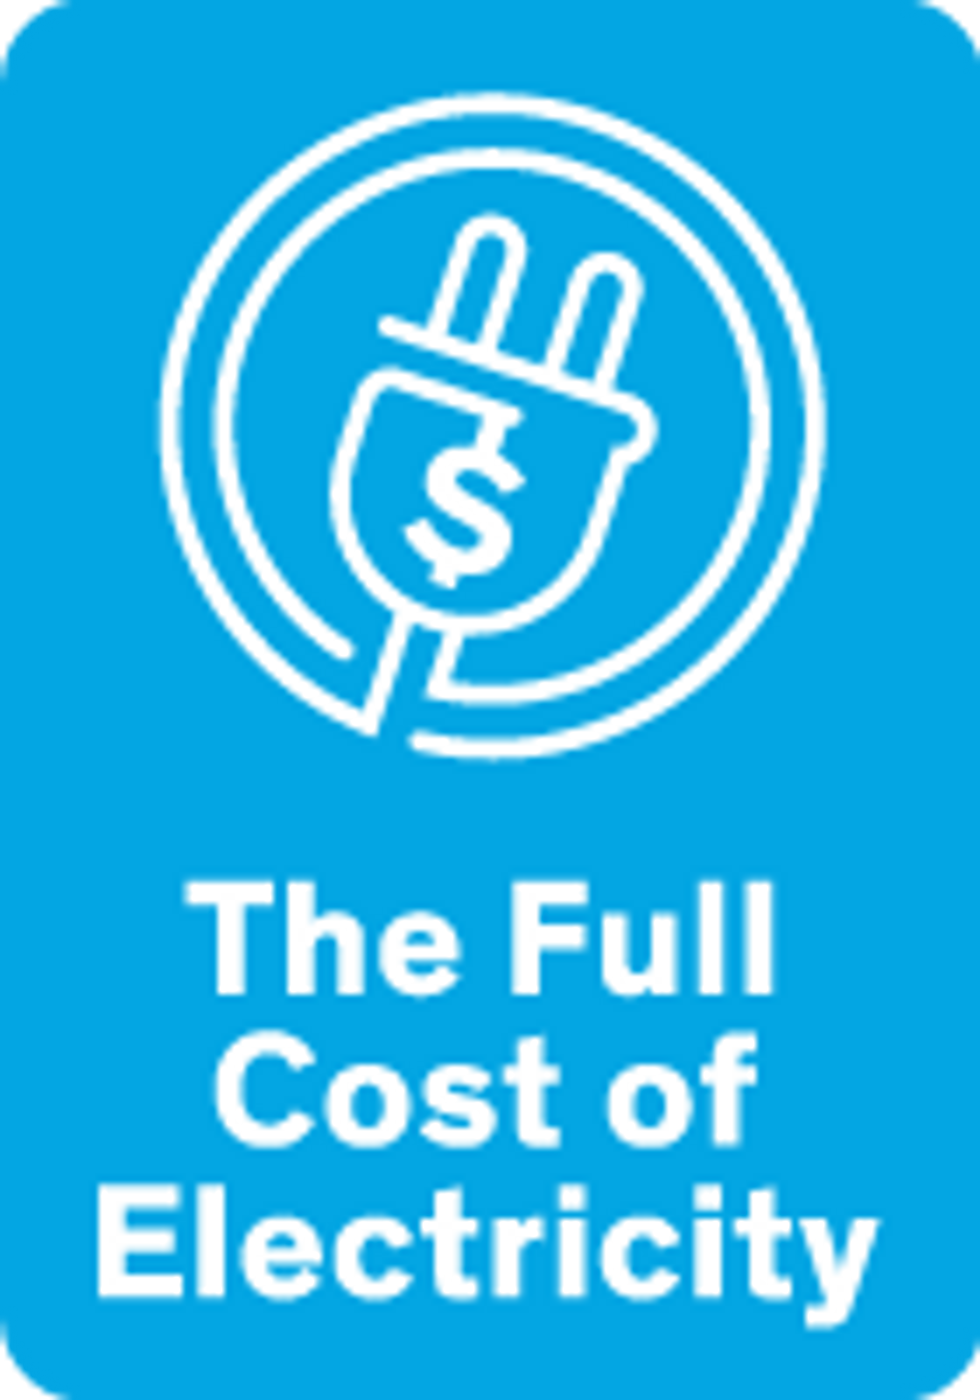 graphic link to the landing page for The Full Cost of Electricity